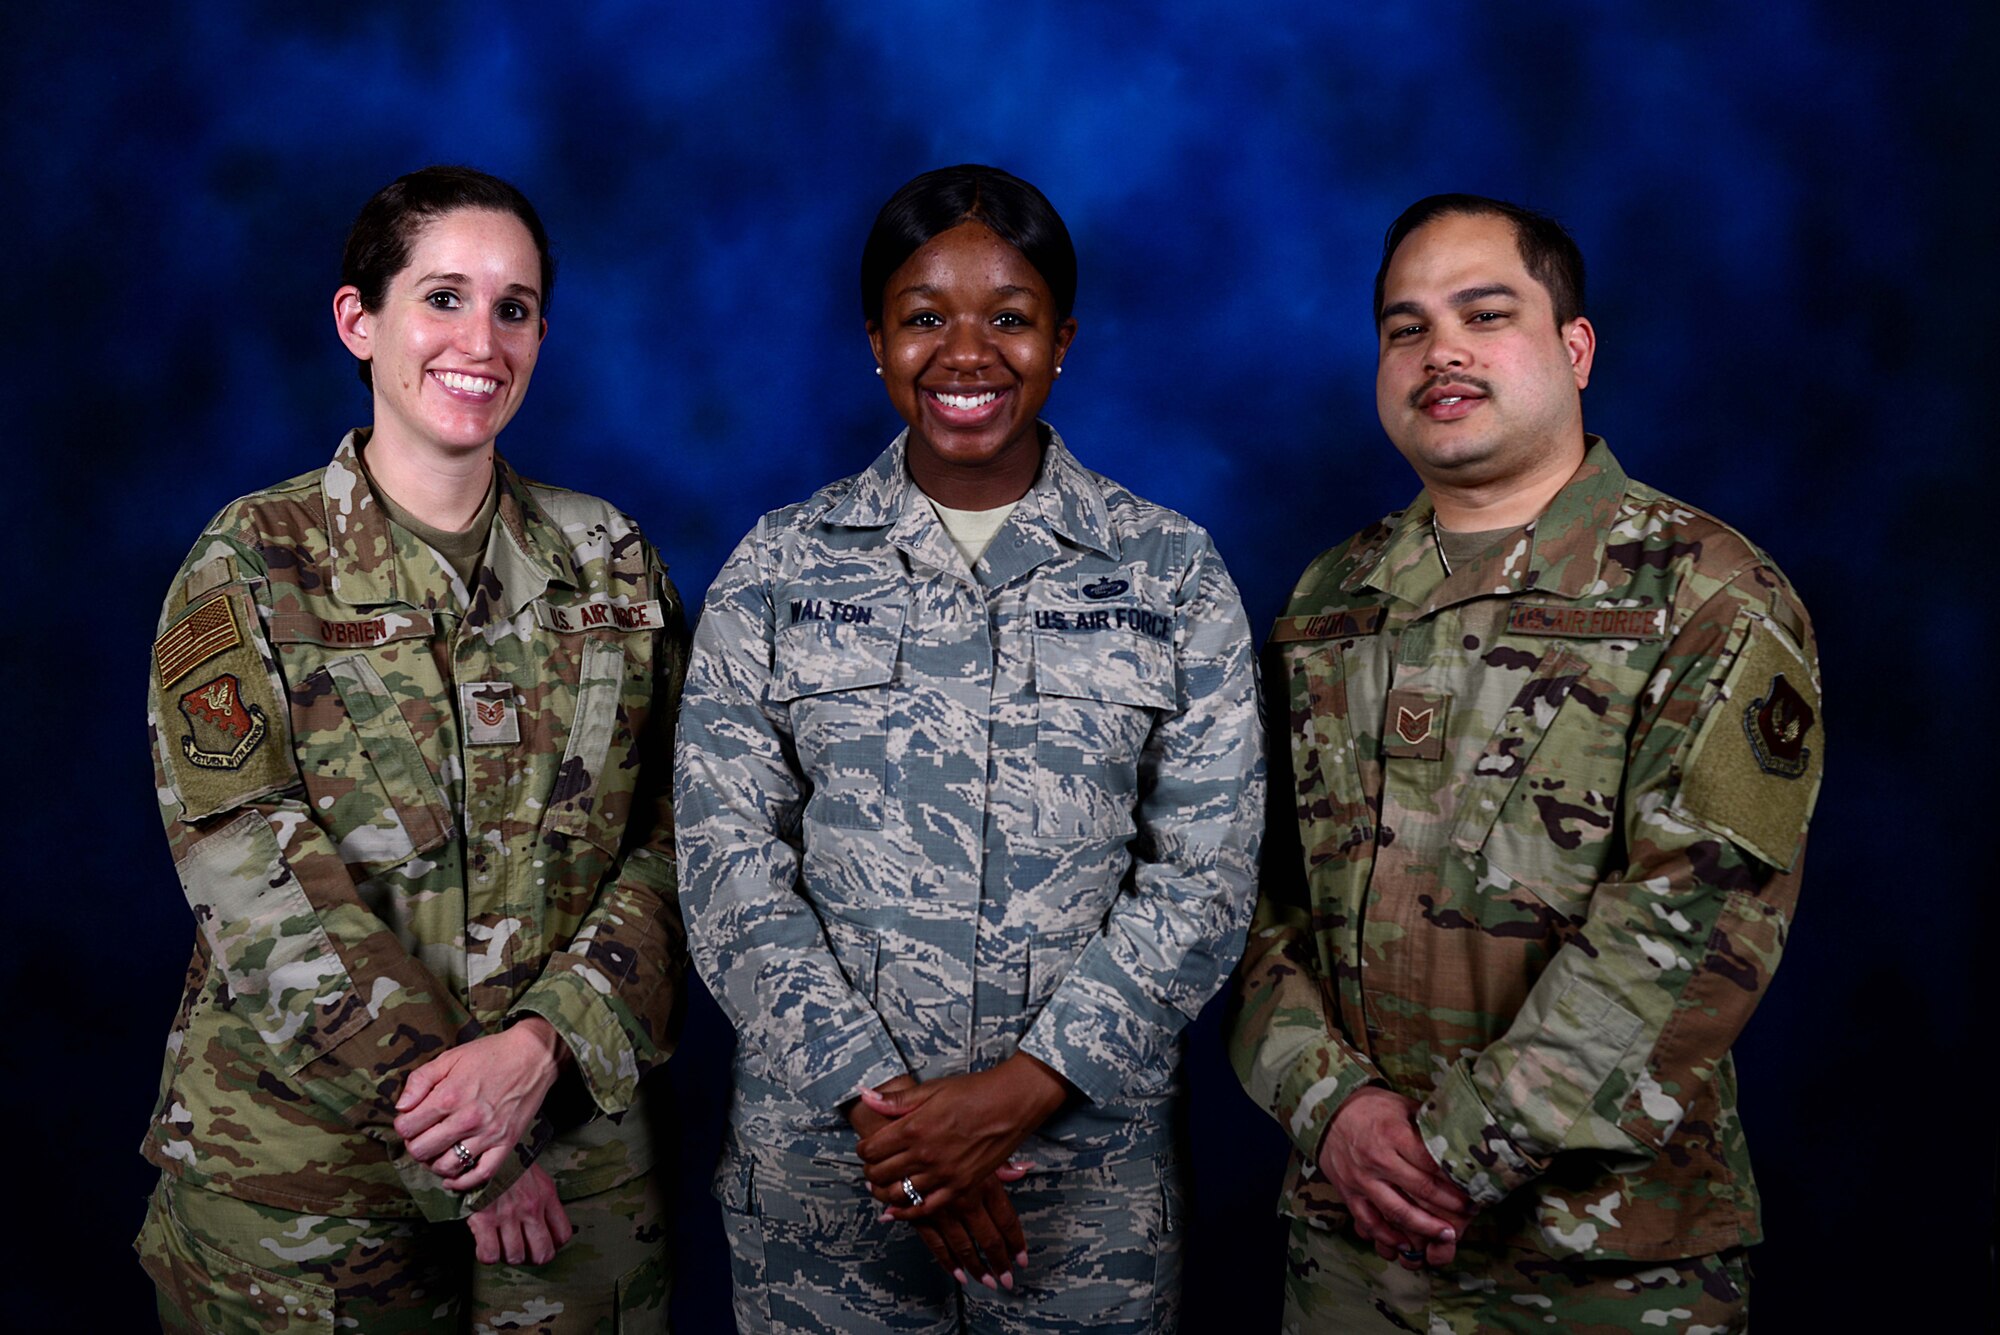 Airmen from the 31st Fighter Wing Equal Opportunity office pose for a photo at Aviano Air Base, Italy, June 12, 2019. Air Force EO strives to accomplish its mission by promoting an environment free from personal, social or institutional barriers that could prevent Air Force members from rising to their highest potential. (Photo by 31st Fighter Wing Public Affairs Office)